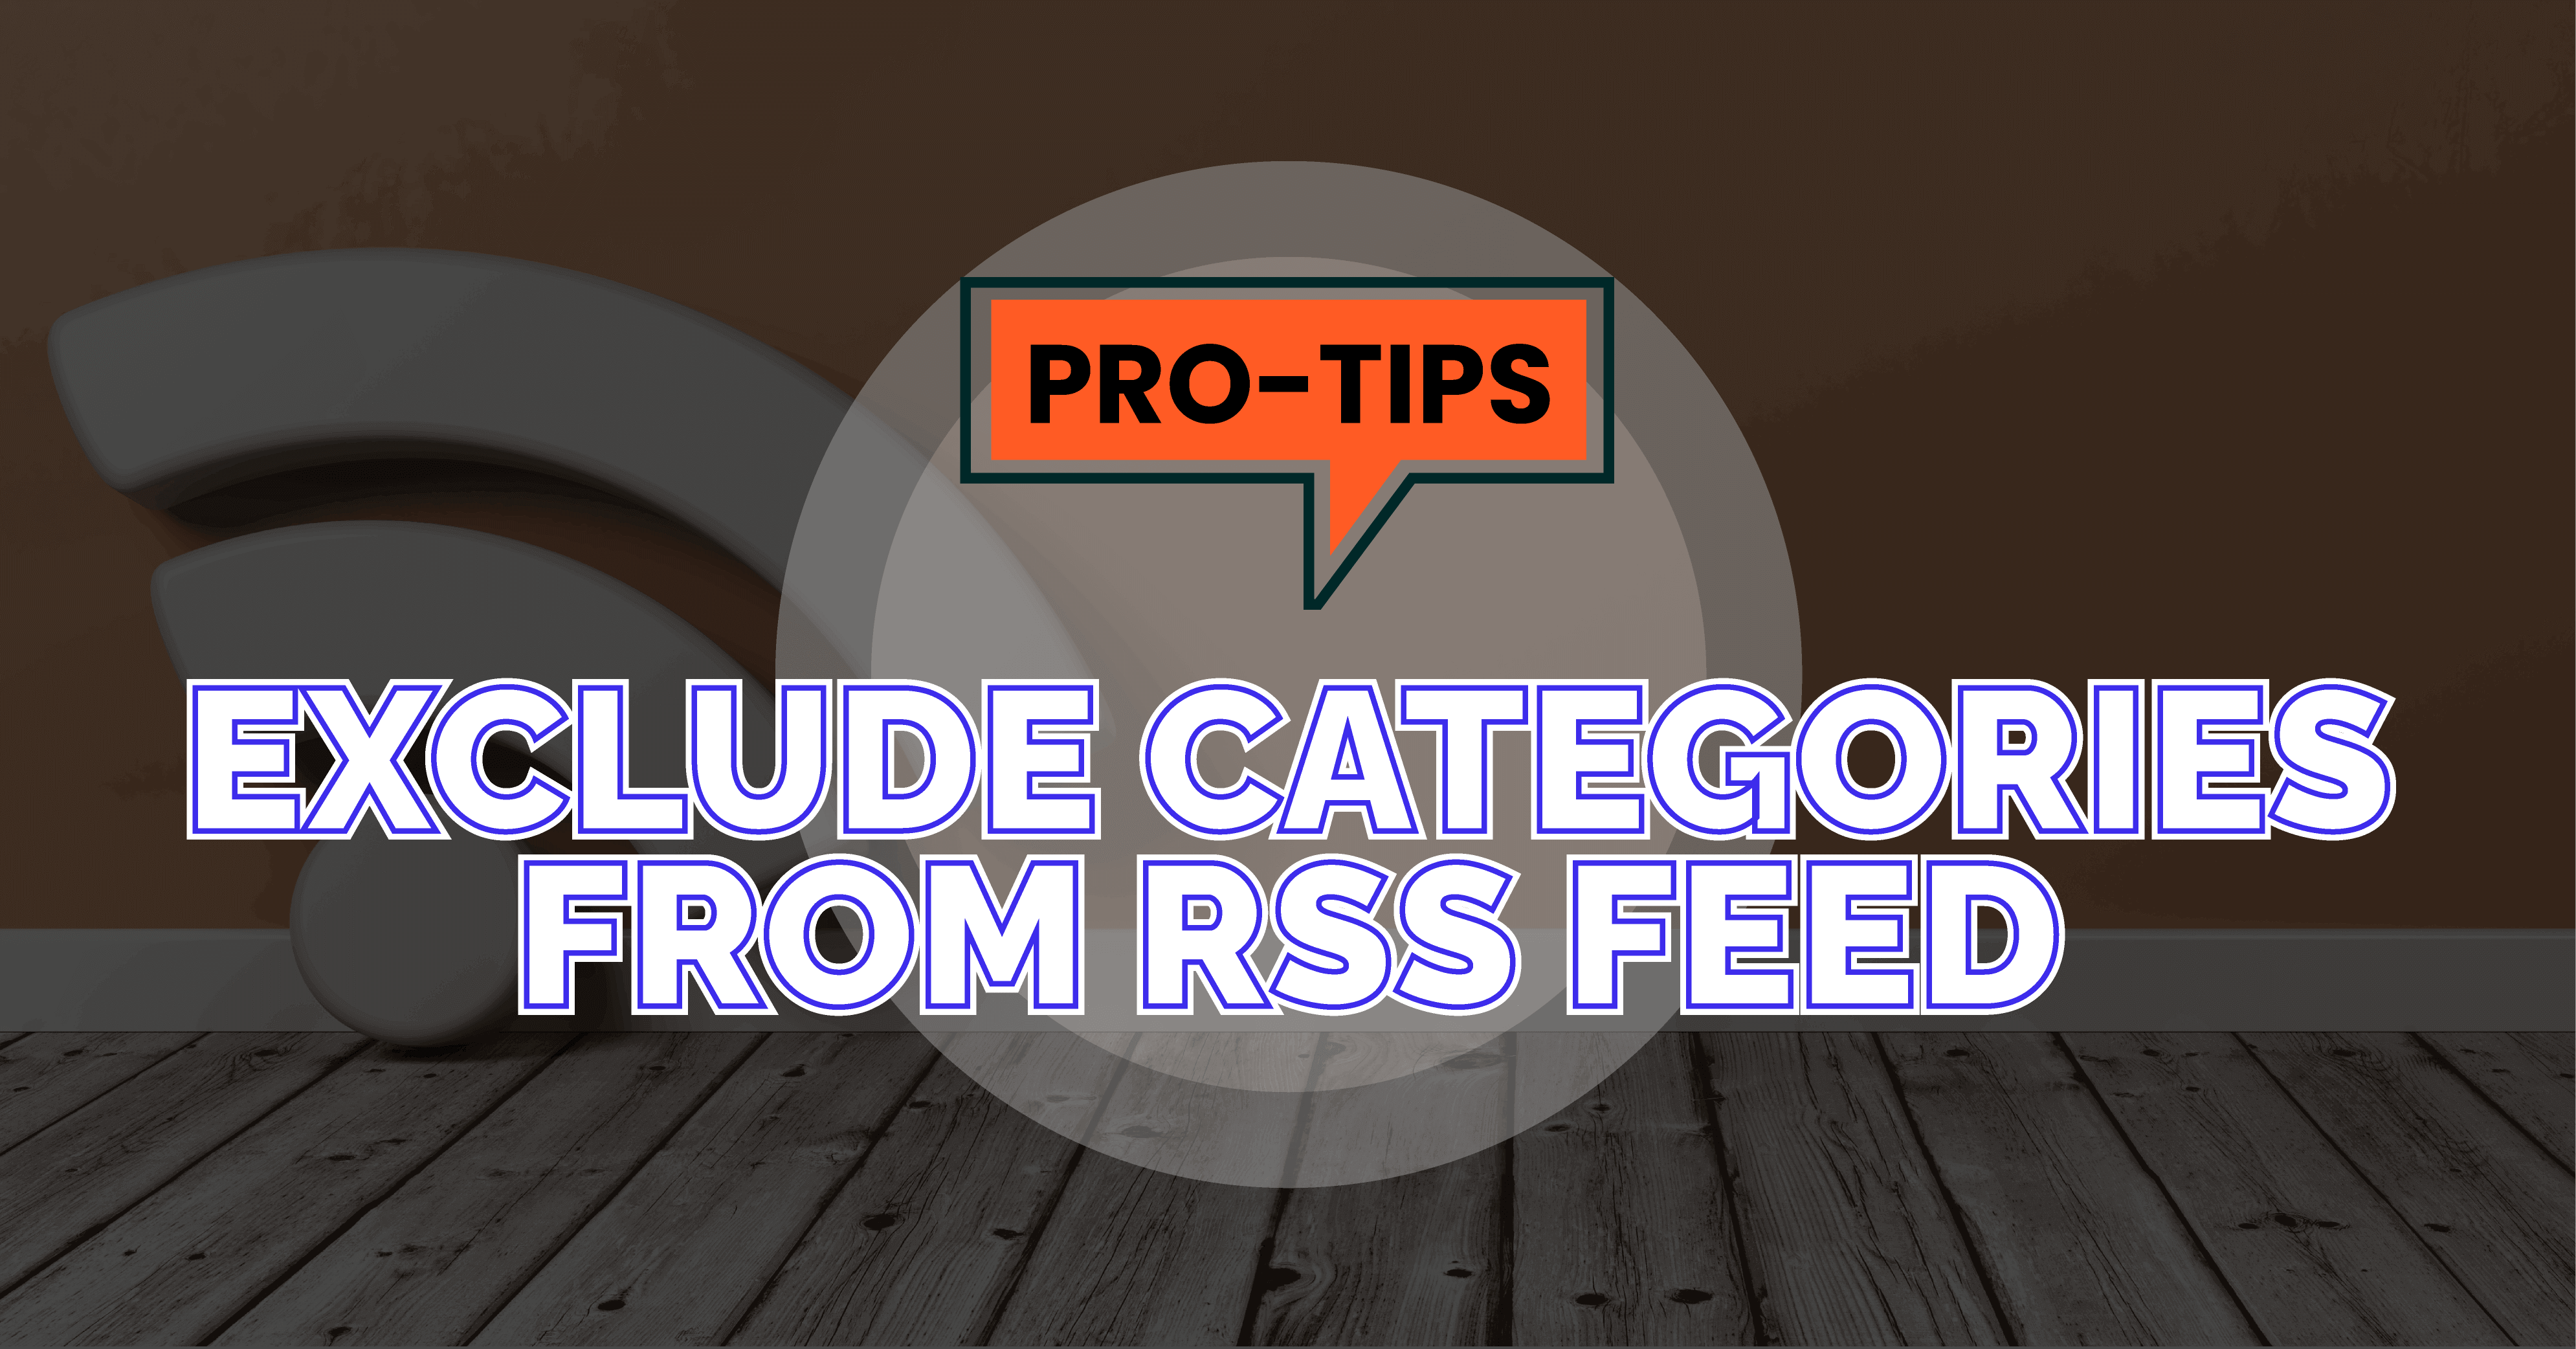 Exclude Categories From RSS Feed - WPManageNinja